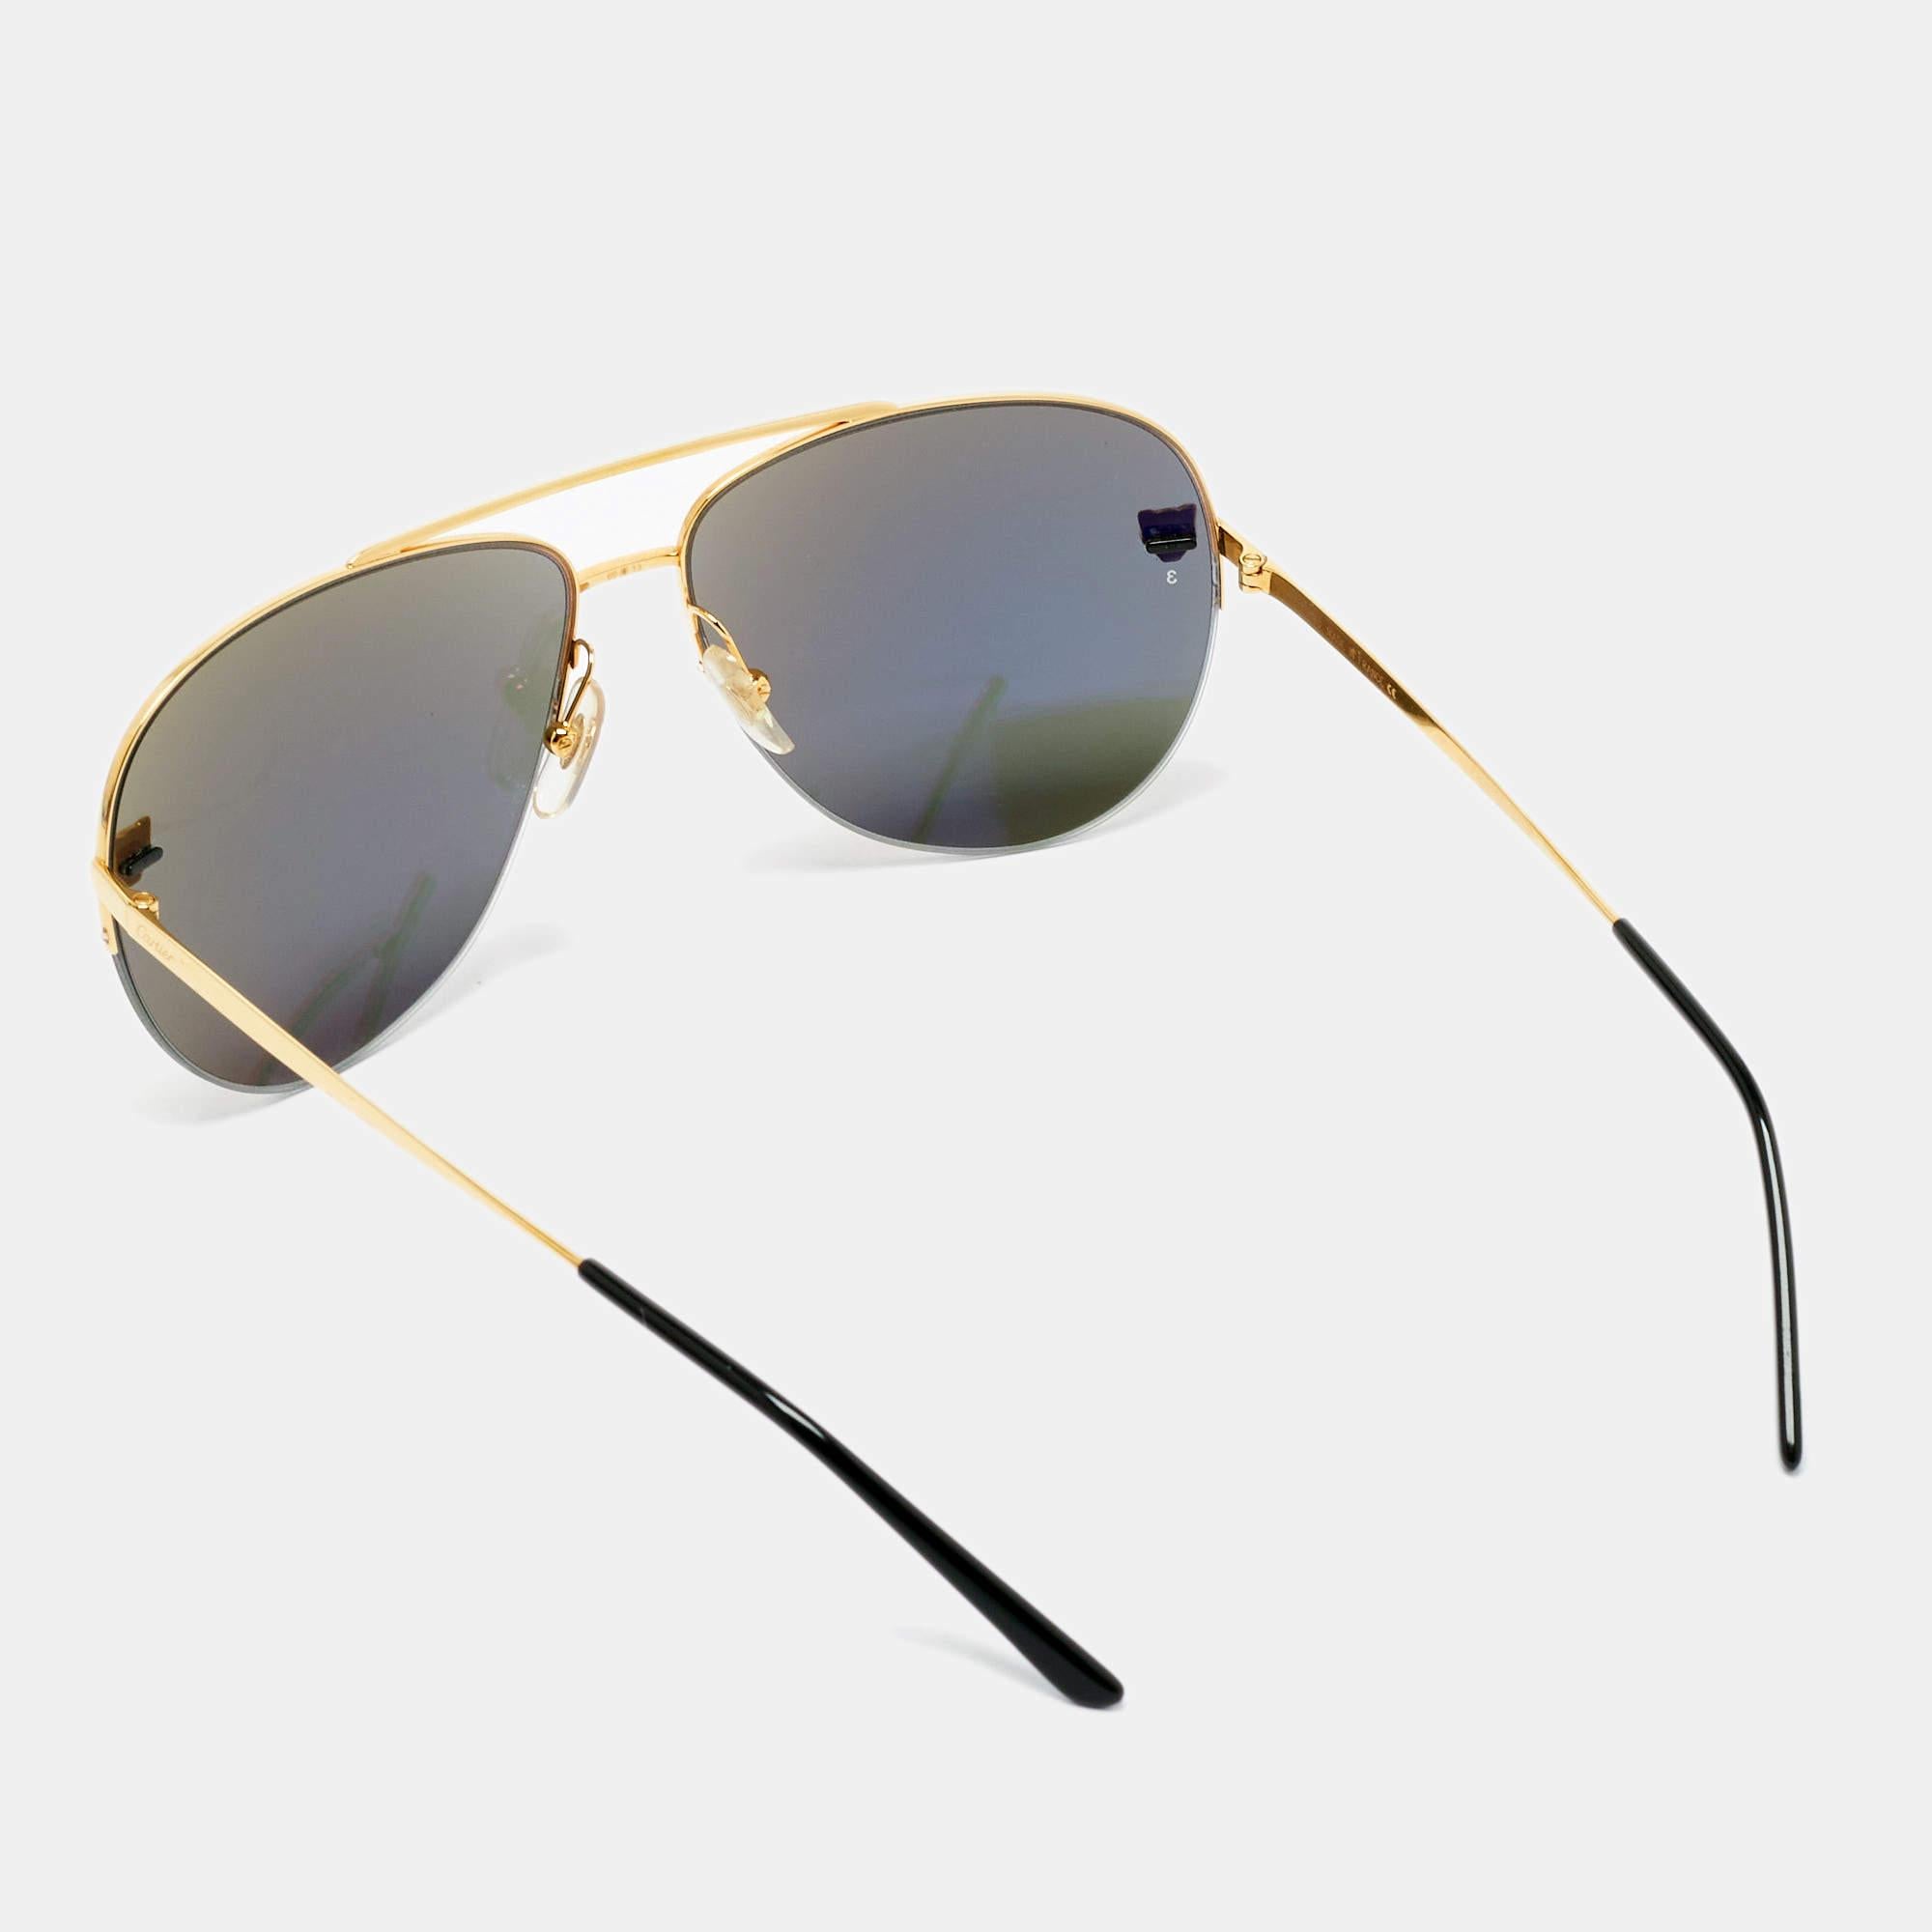 Introducing the Cartier Panthère de Cartier sunglasses, a true epitome of luxury and style. With their sleek aviator design, mirrored lenses, and iconic panther accents, these sunglasses exude sophistication and elegance, making them the perfect